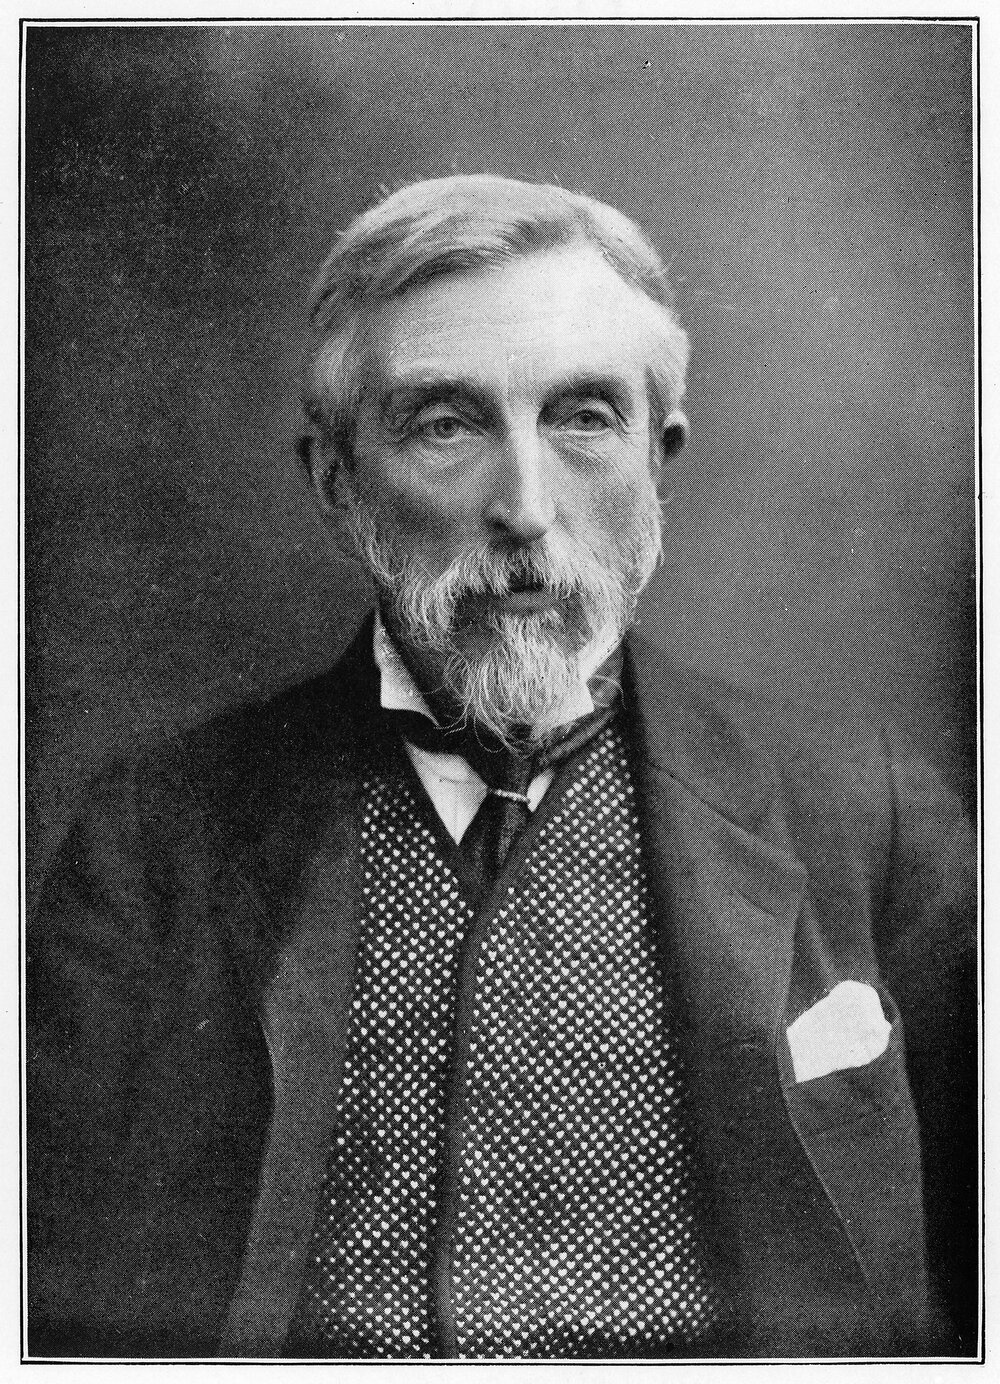 Portrait of Charles Booth